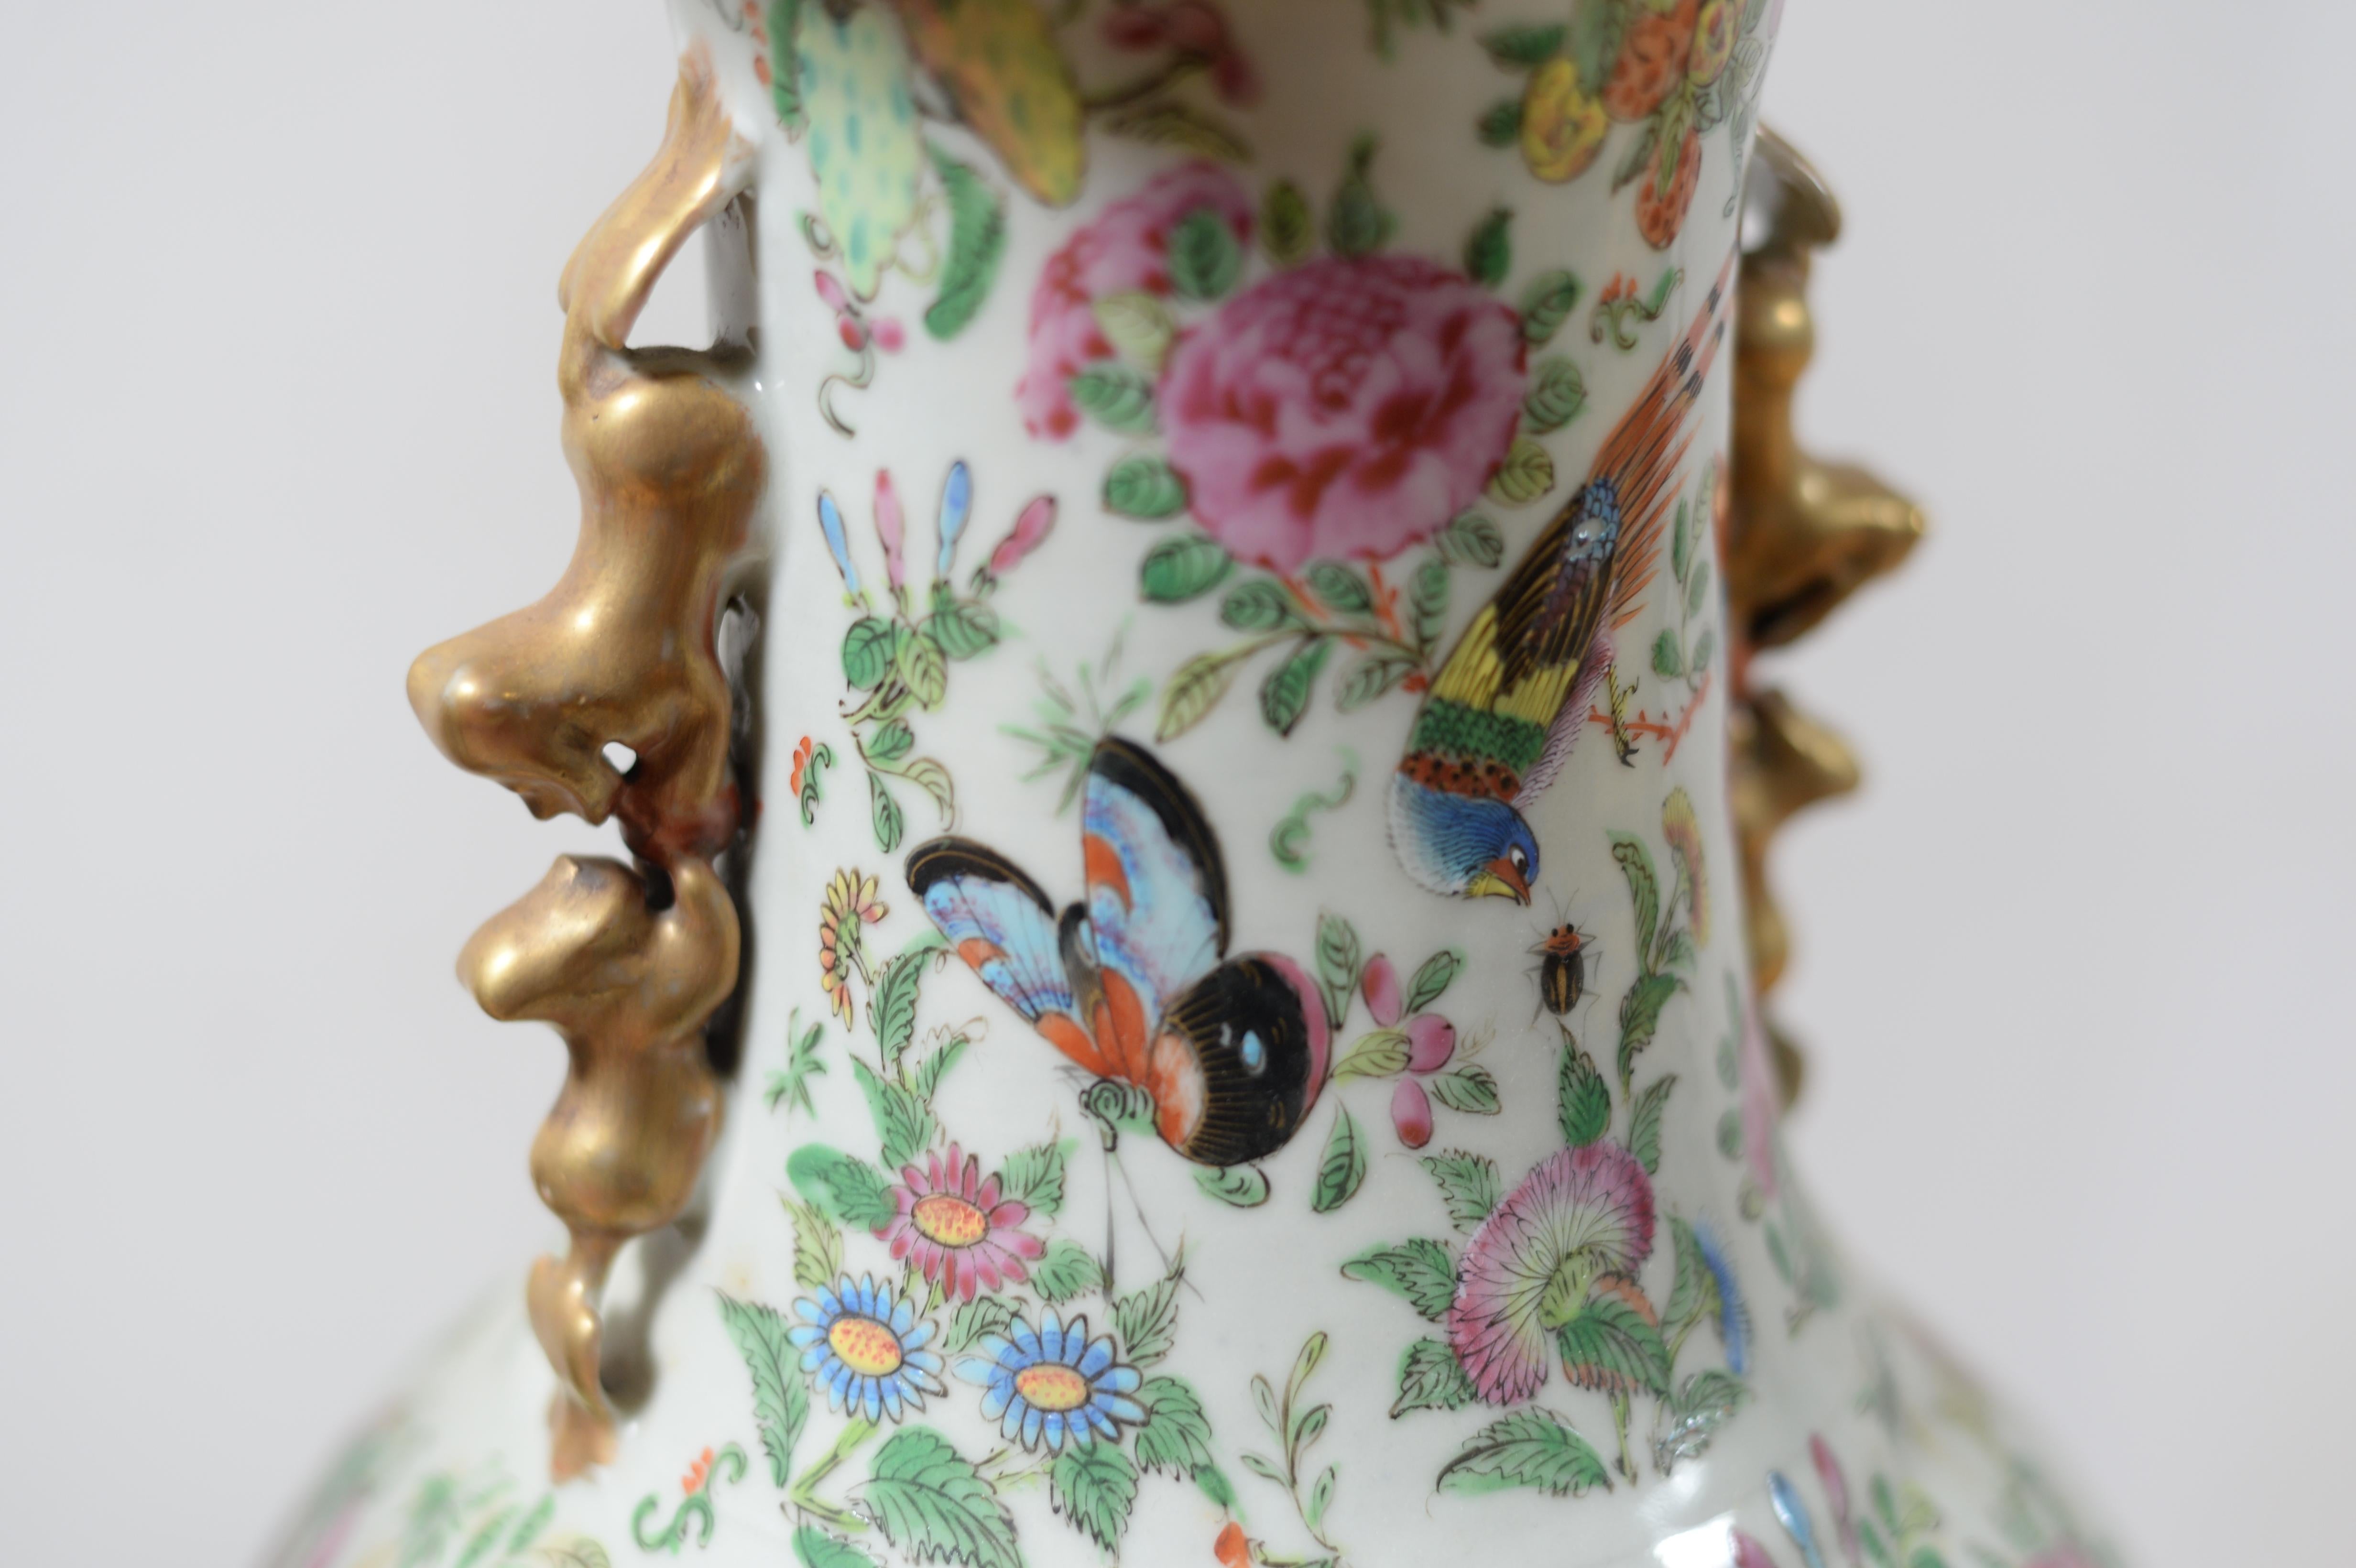 19th century Chinese vases, butterfly decor, flowers, birds, pink period, porcelain, no frail no chips in very good condition.
Measures: Diameter of the neck 22 cm, height 63 cm, 70 cm total height with the wooden base.